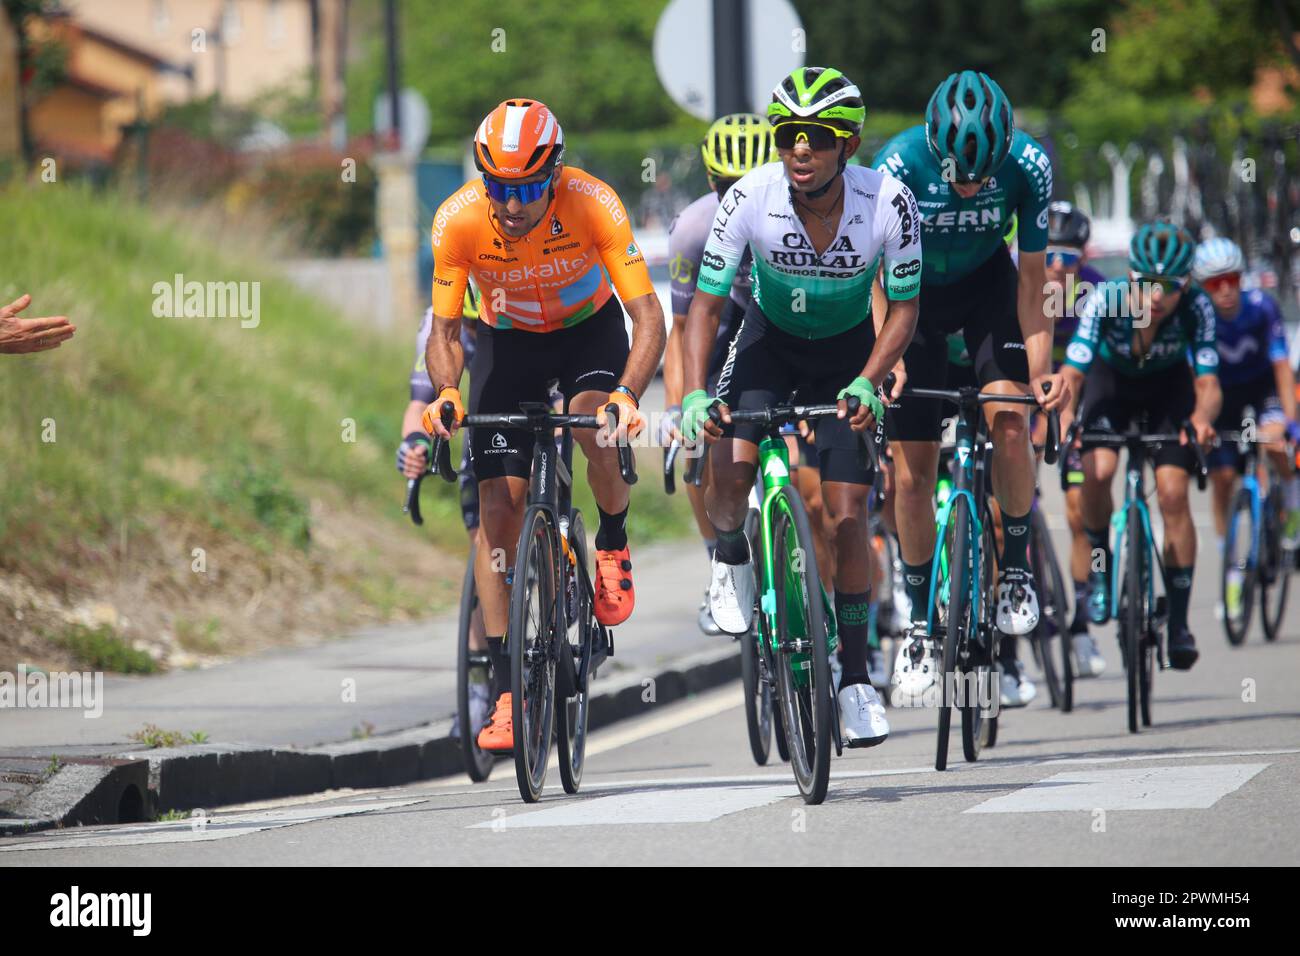 Oviedo, Spain. 30th Apr, 2023. The escape led by Luis Angel Mate (Euskaltel - Euskadi, L) and Mulu Kinfe Hailemichael (Caja Rural - Seguros RGA, R) during the 3rd stage of the Vuelta a Asturias 2023 between Cangas del Narcea and Oviedo, on April 30, 2023, in Oviedo, Spain. (Photo by Alberto Brevers/Pacific Press) Credit: Pacific Press Media Production Corp./Alamy Live News Stock Photo